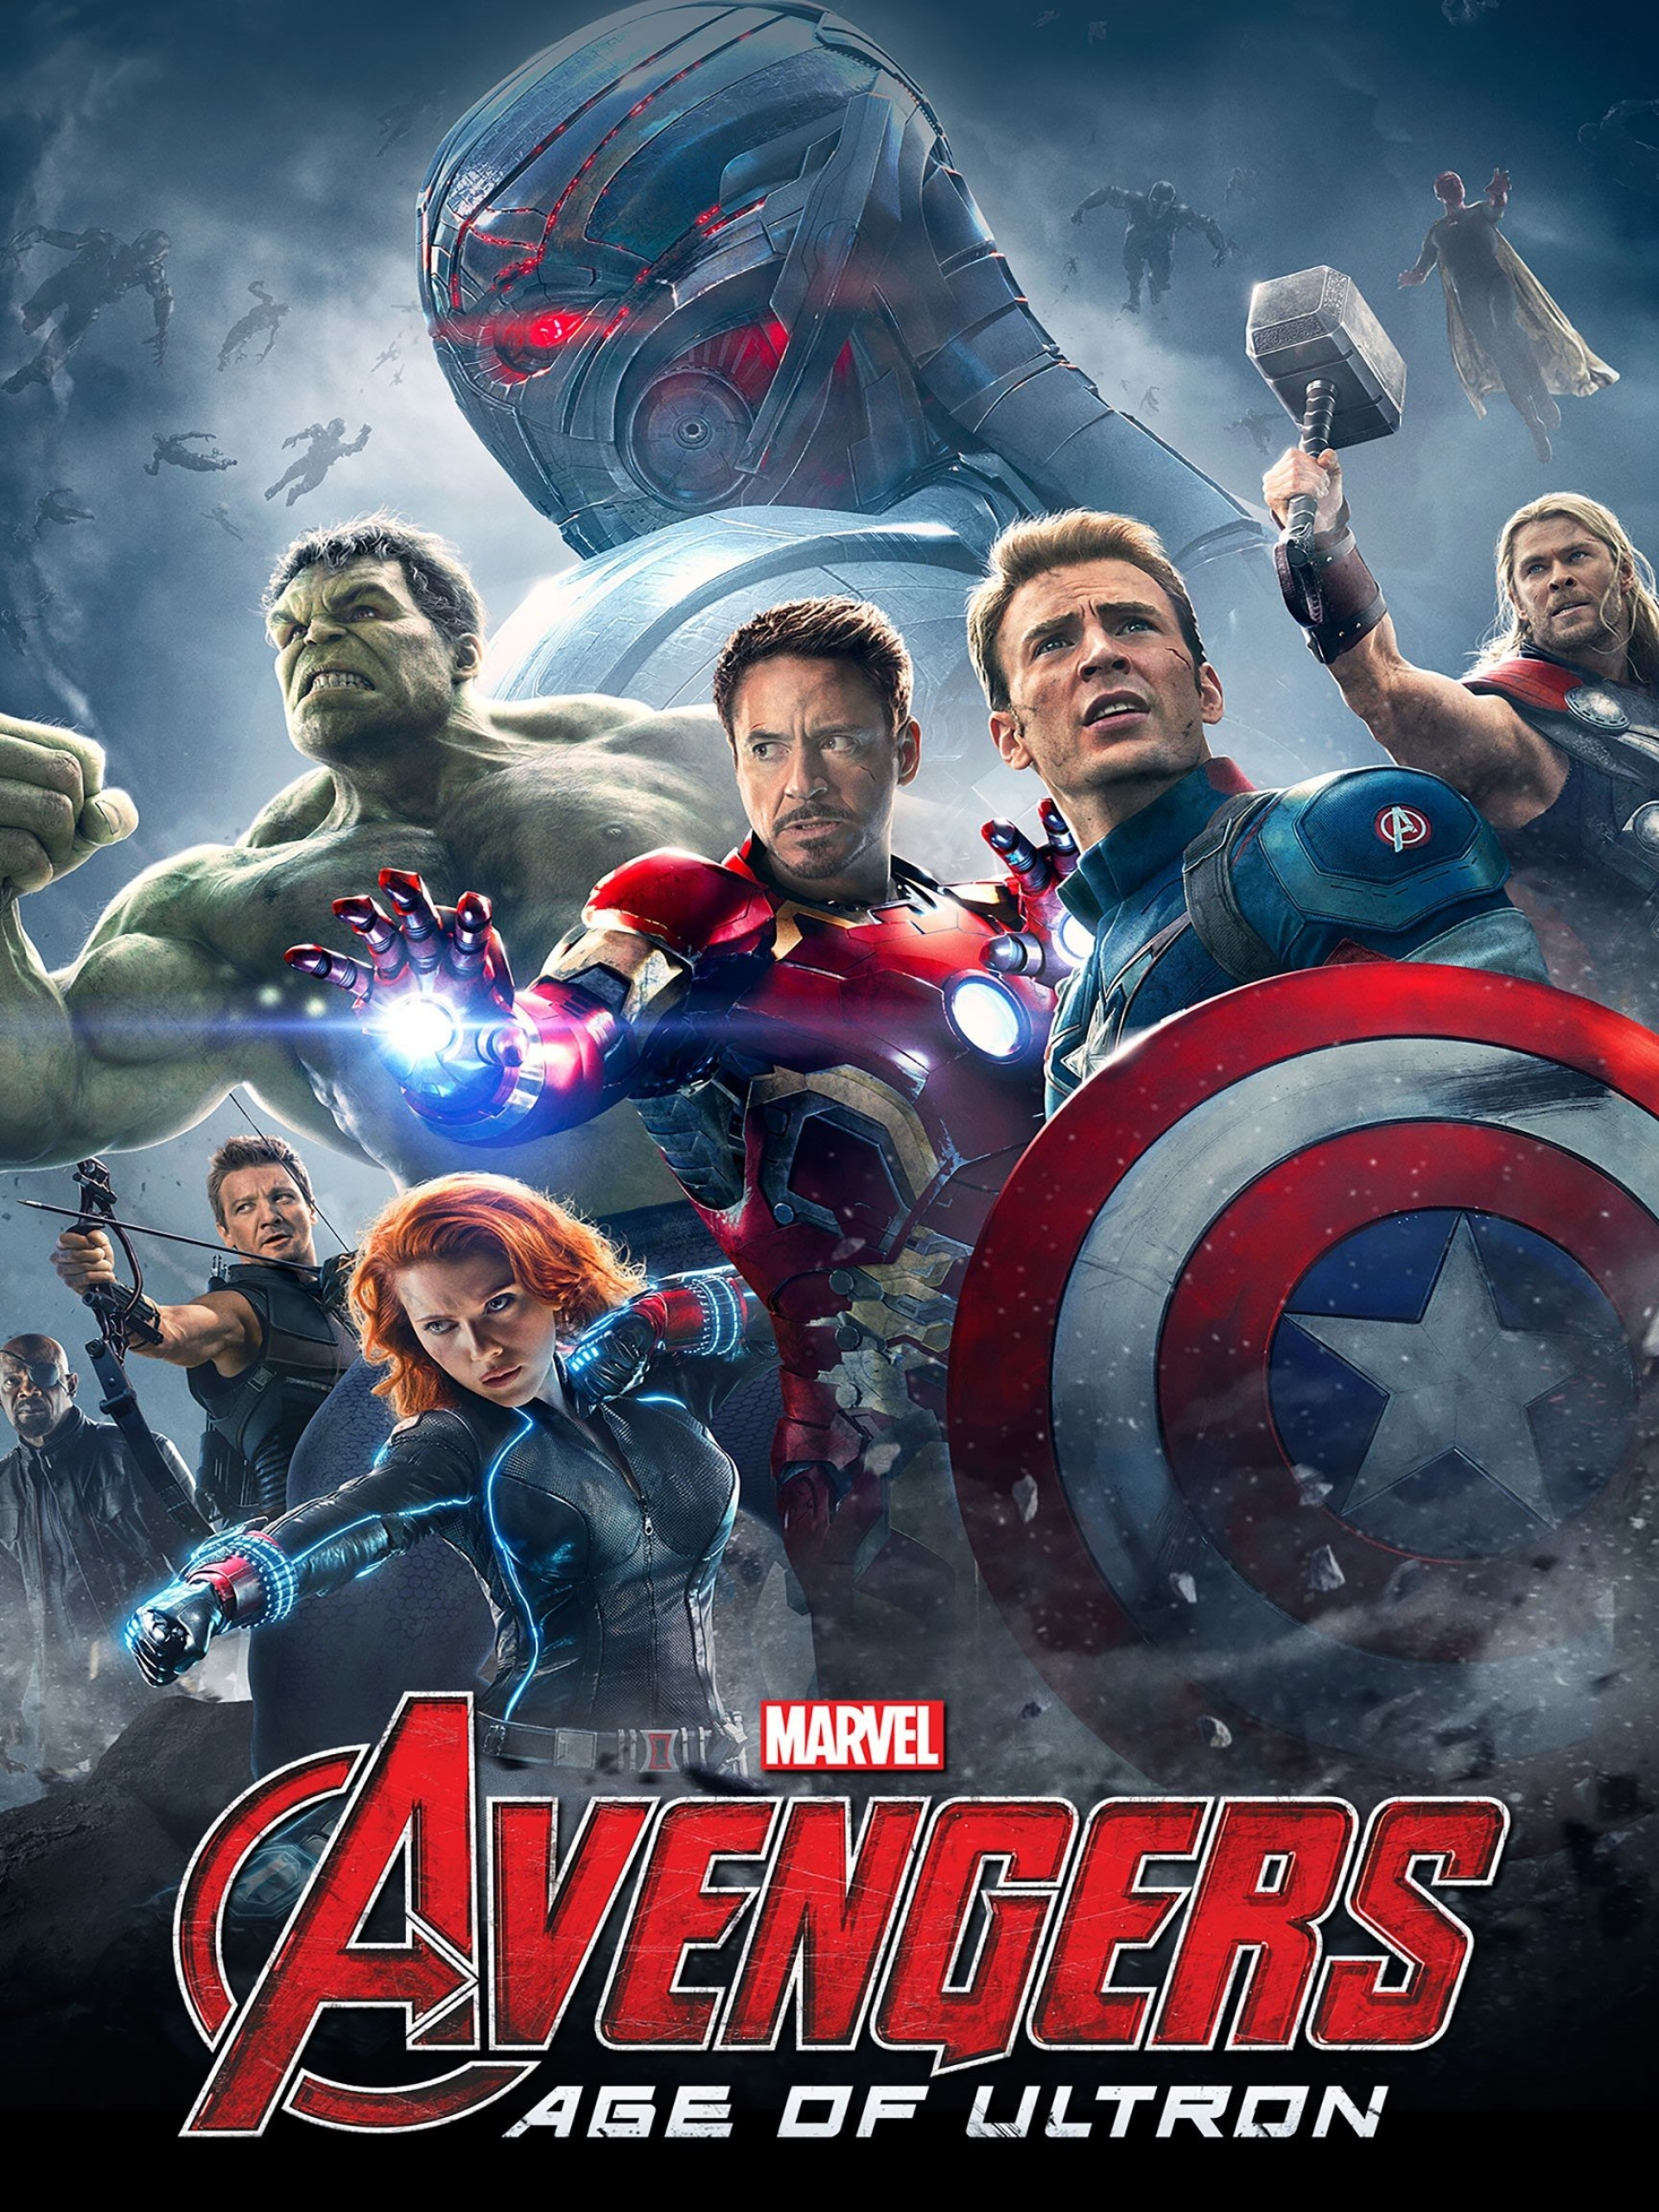 Avengers: Age of Ultron, Earth's mightiest heroes, Robot uprising, Joss Whedon's direction, 1920x2560 HD Handy